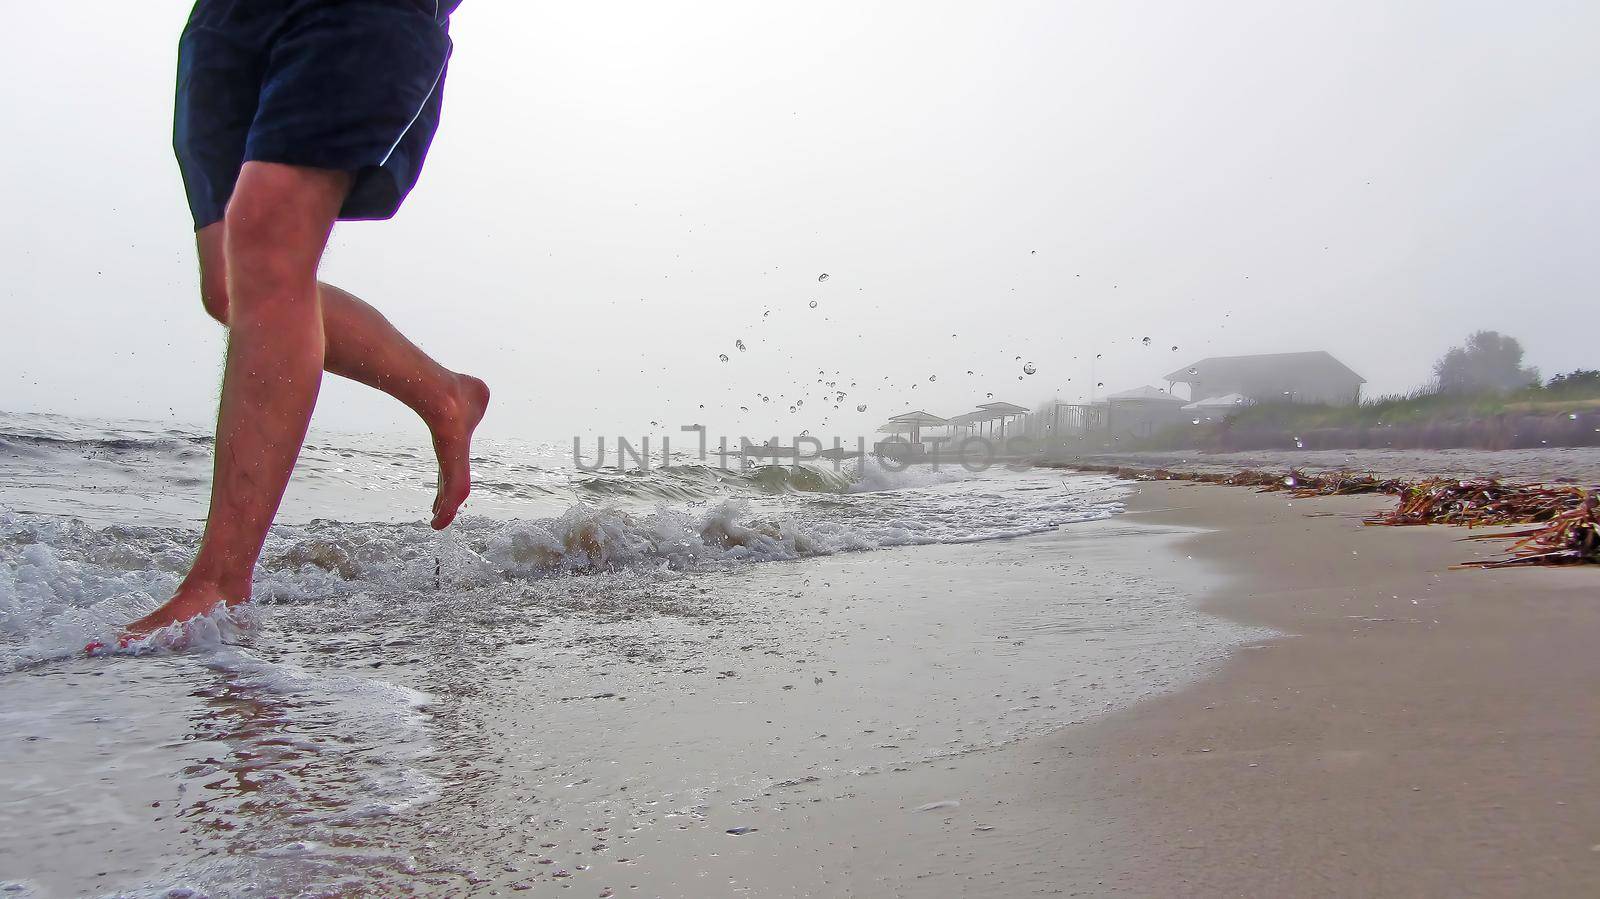 Splashes from the waves are flying around. sand and waves under the feet of a man running in shorts. Barefoot morning jogging on the beach. The feet of a man running along a sea beach in foggy weather.